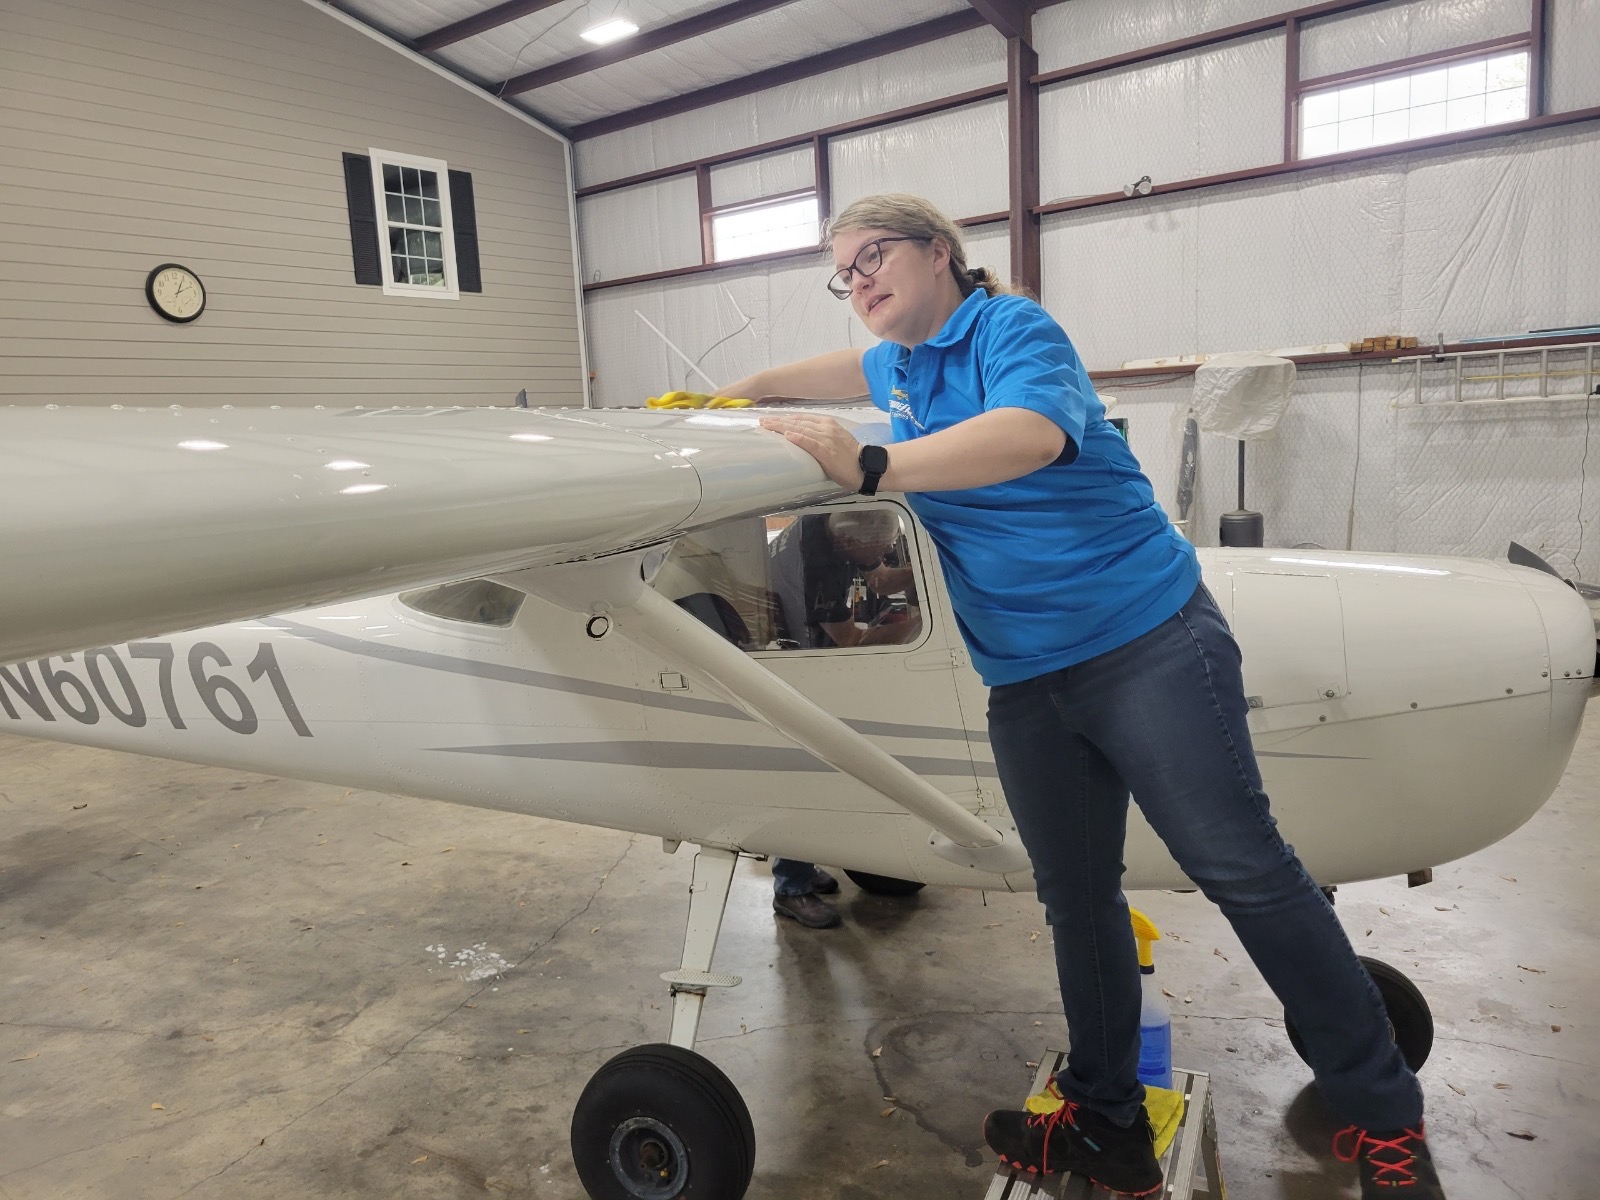 Code 1 provides aircraft ceramic coating around the extended DFW area